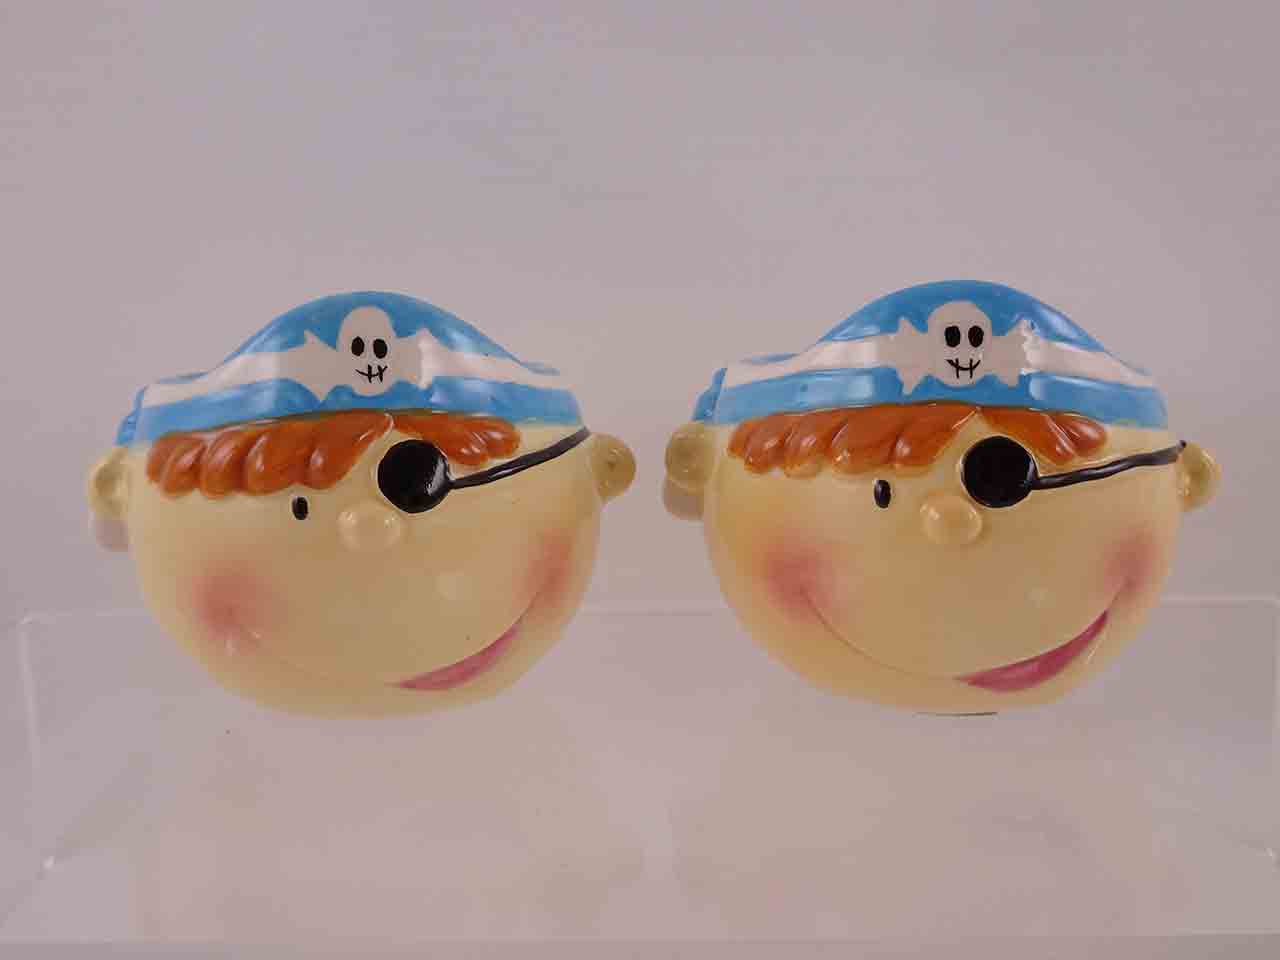 Pirate Heads that Double as Eggcups salt and pepper shakers